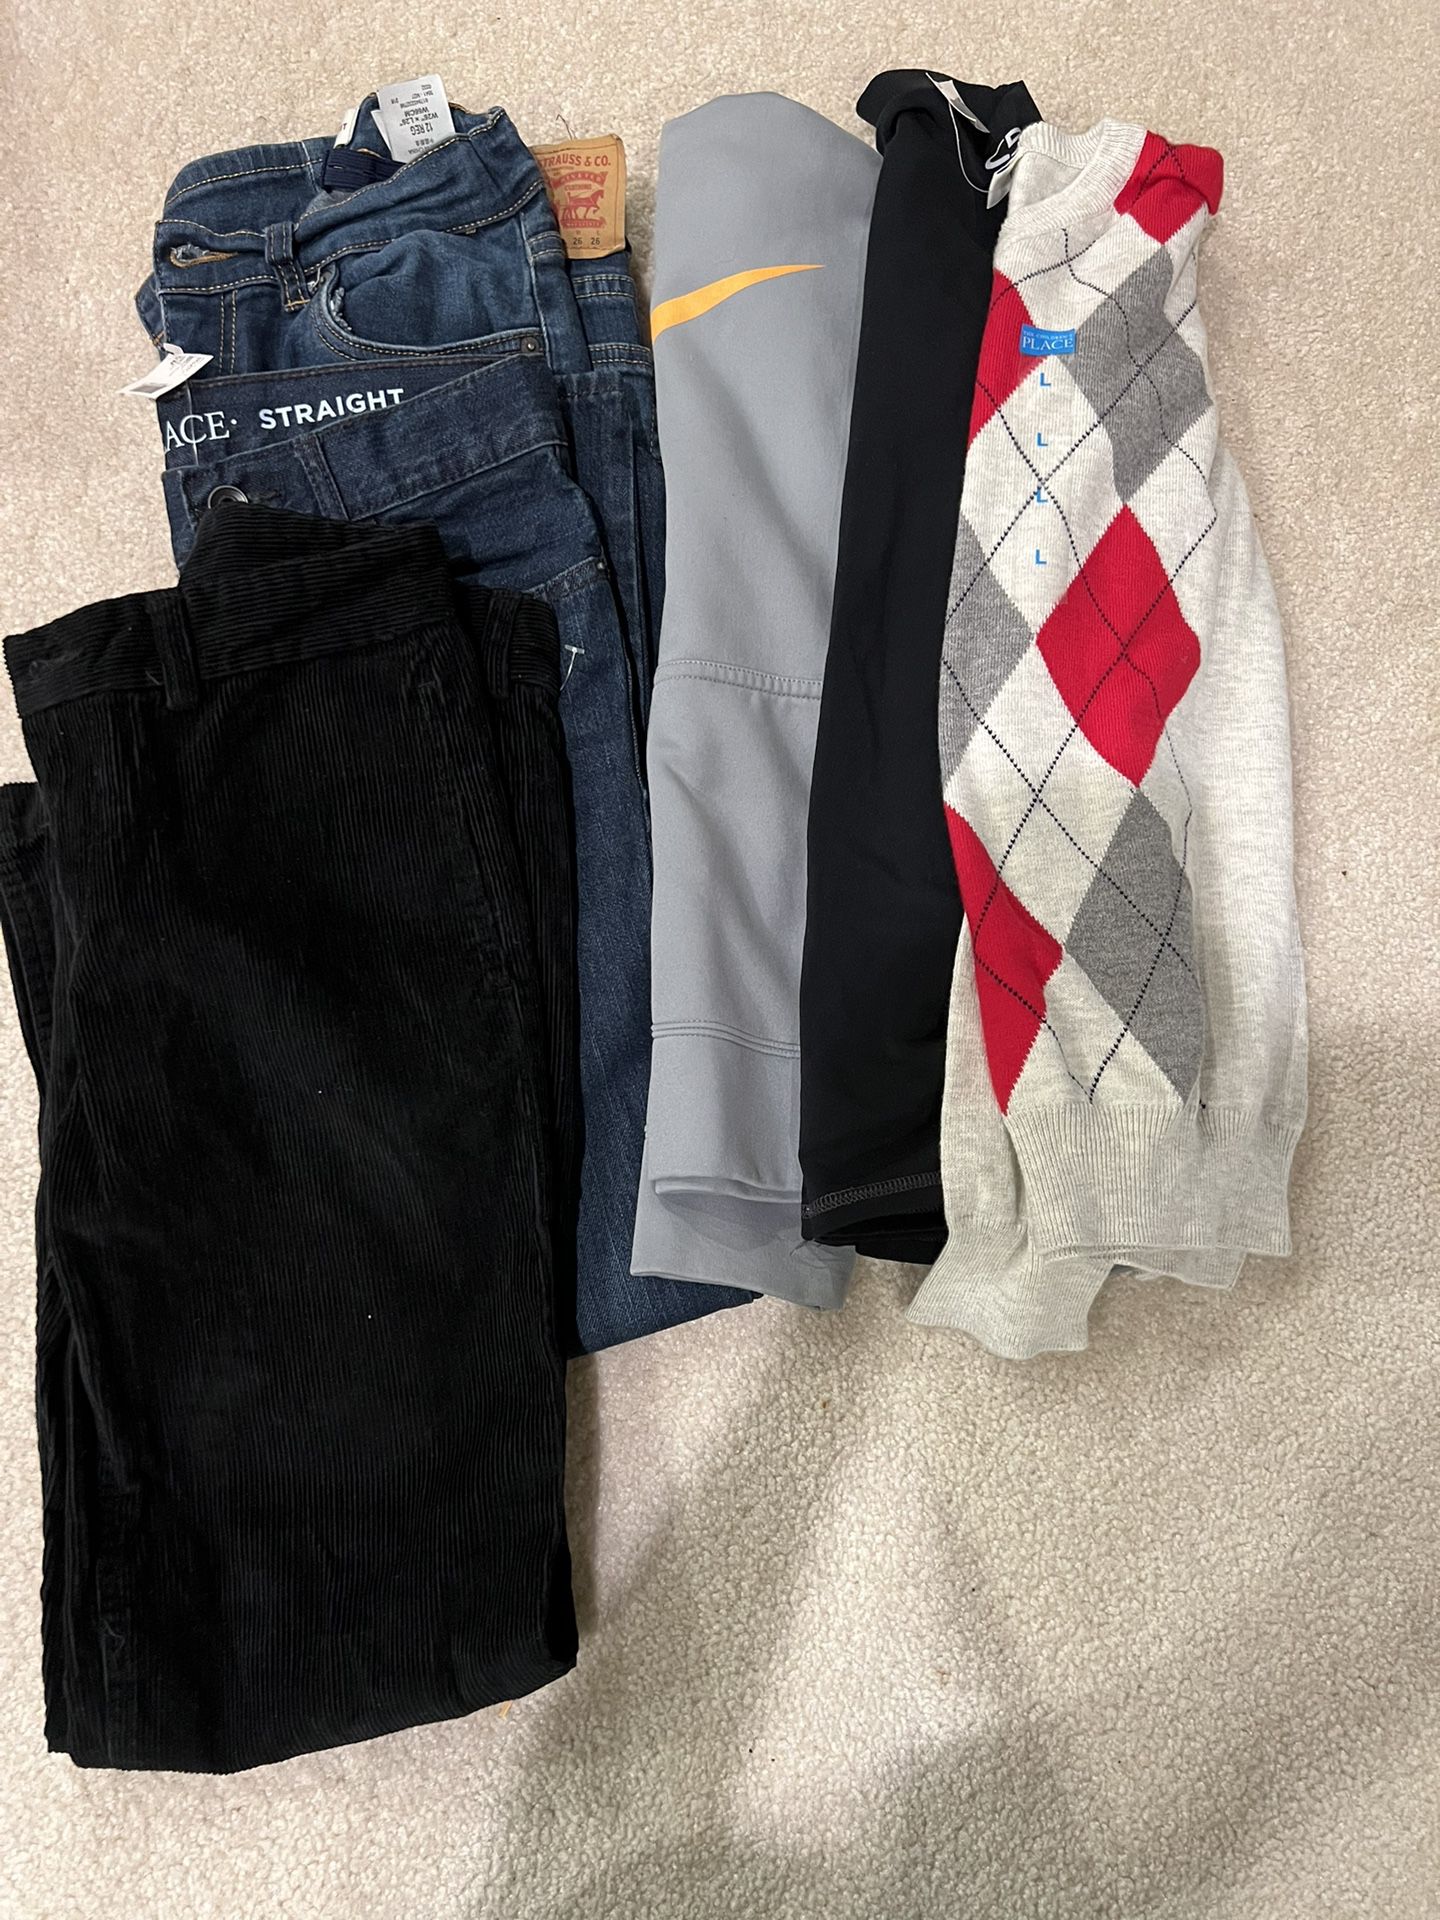 Boys Size 10 and 12 Clothing Some New And Some Barely Worm